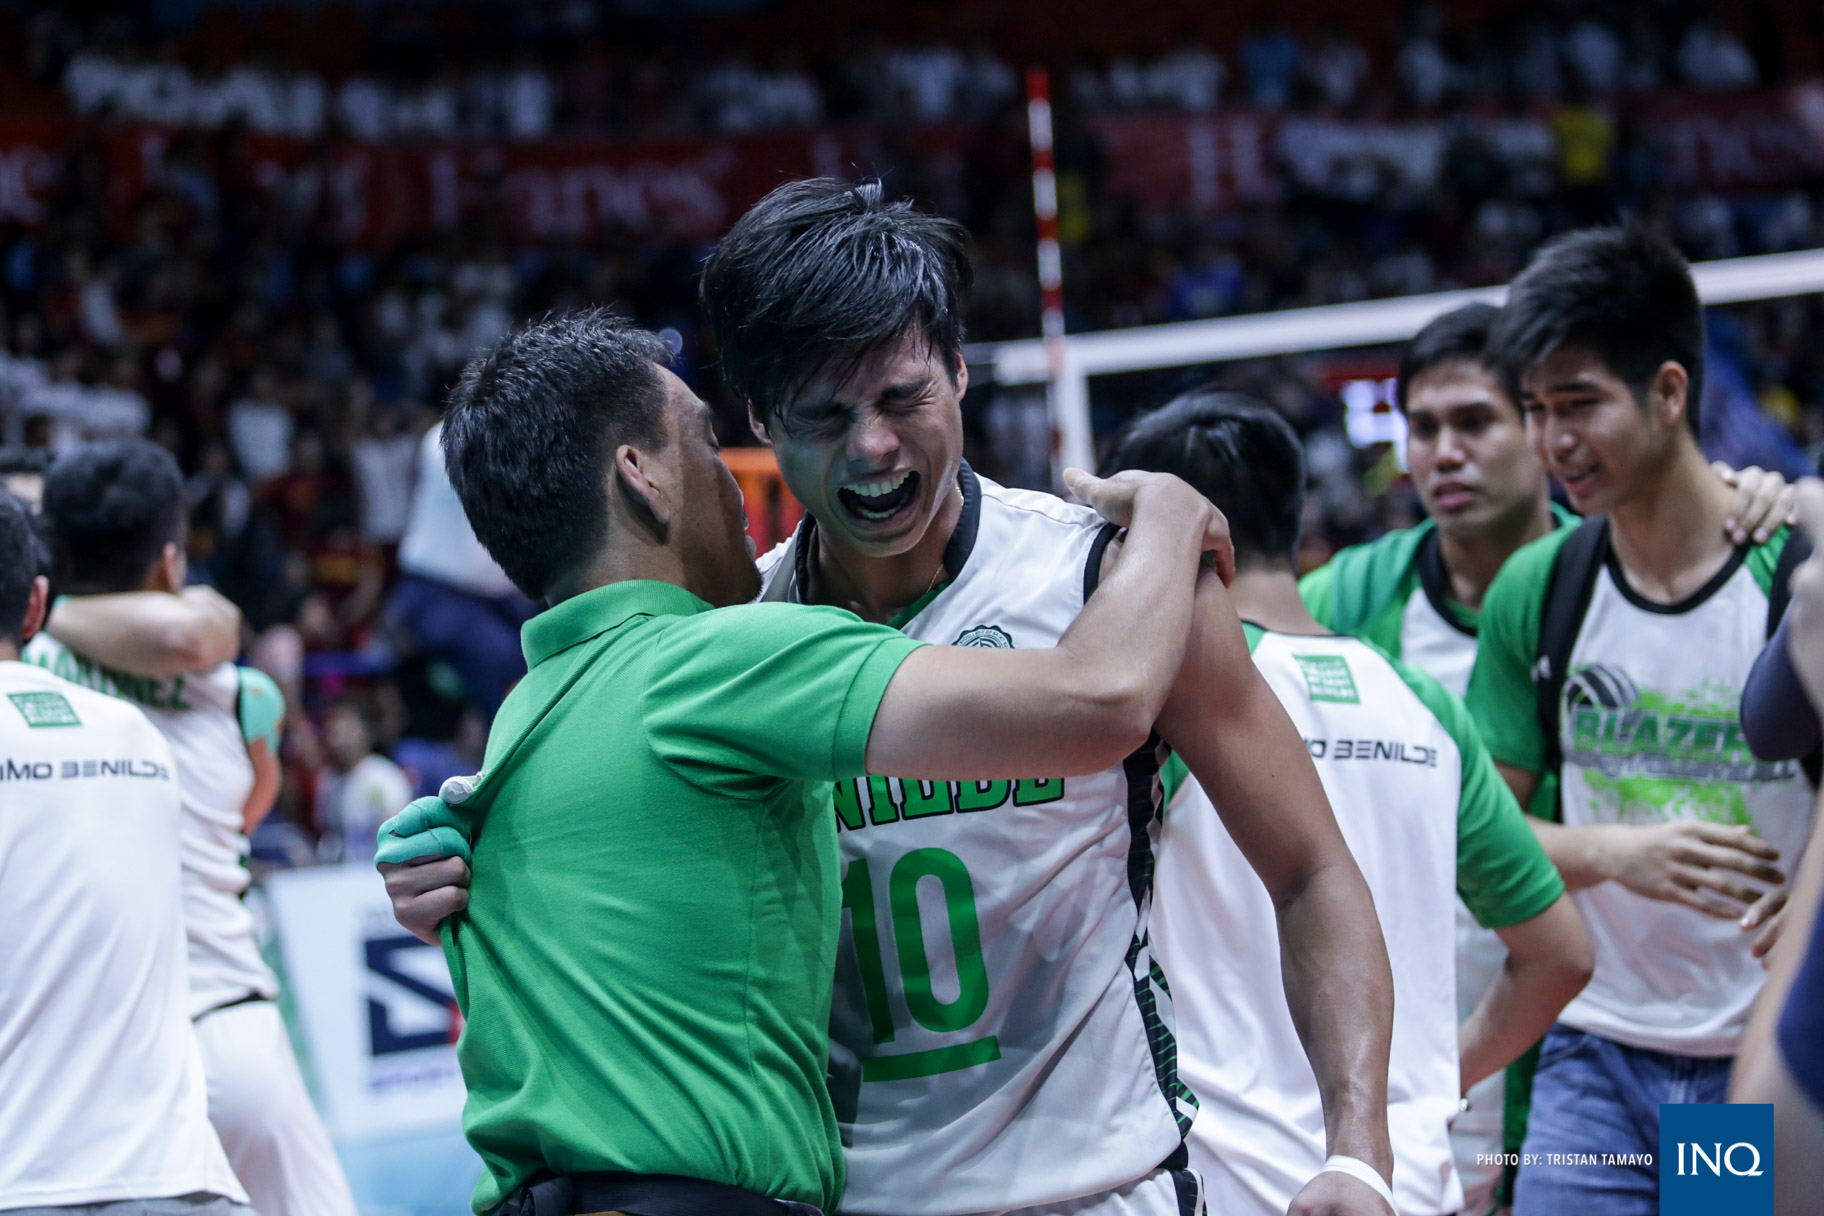 An emotional Johnvic Guzman after the St. Benilde Blazers clinch the title. Photo by Tristan Tamayo/INQUIRER.net